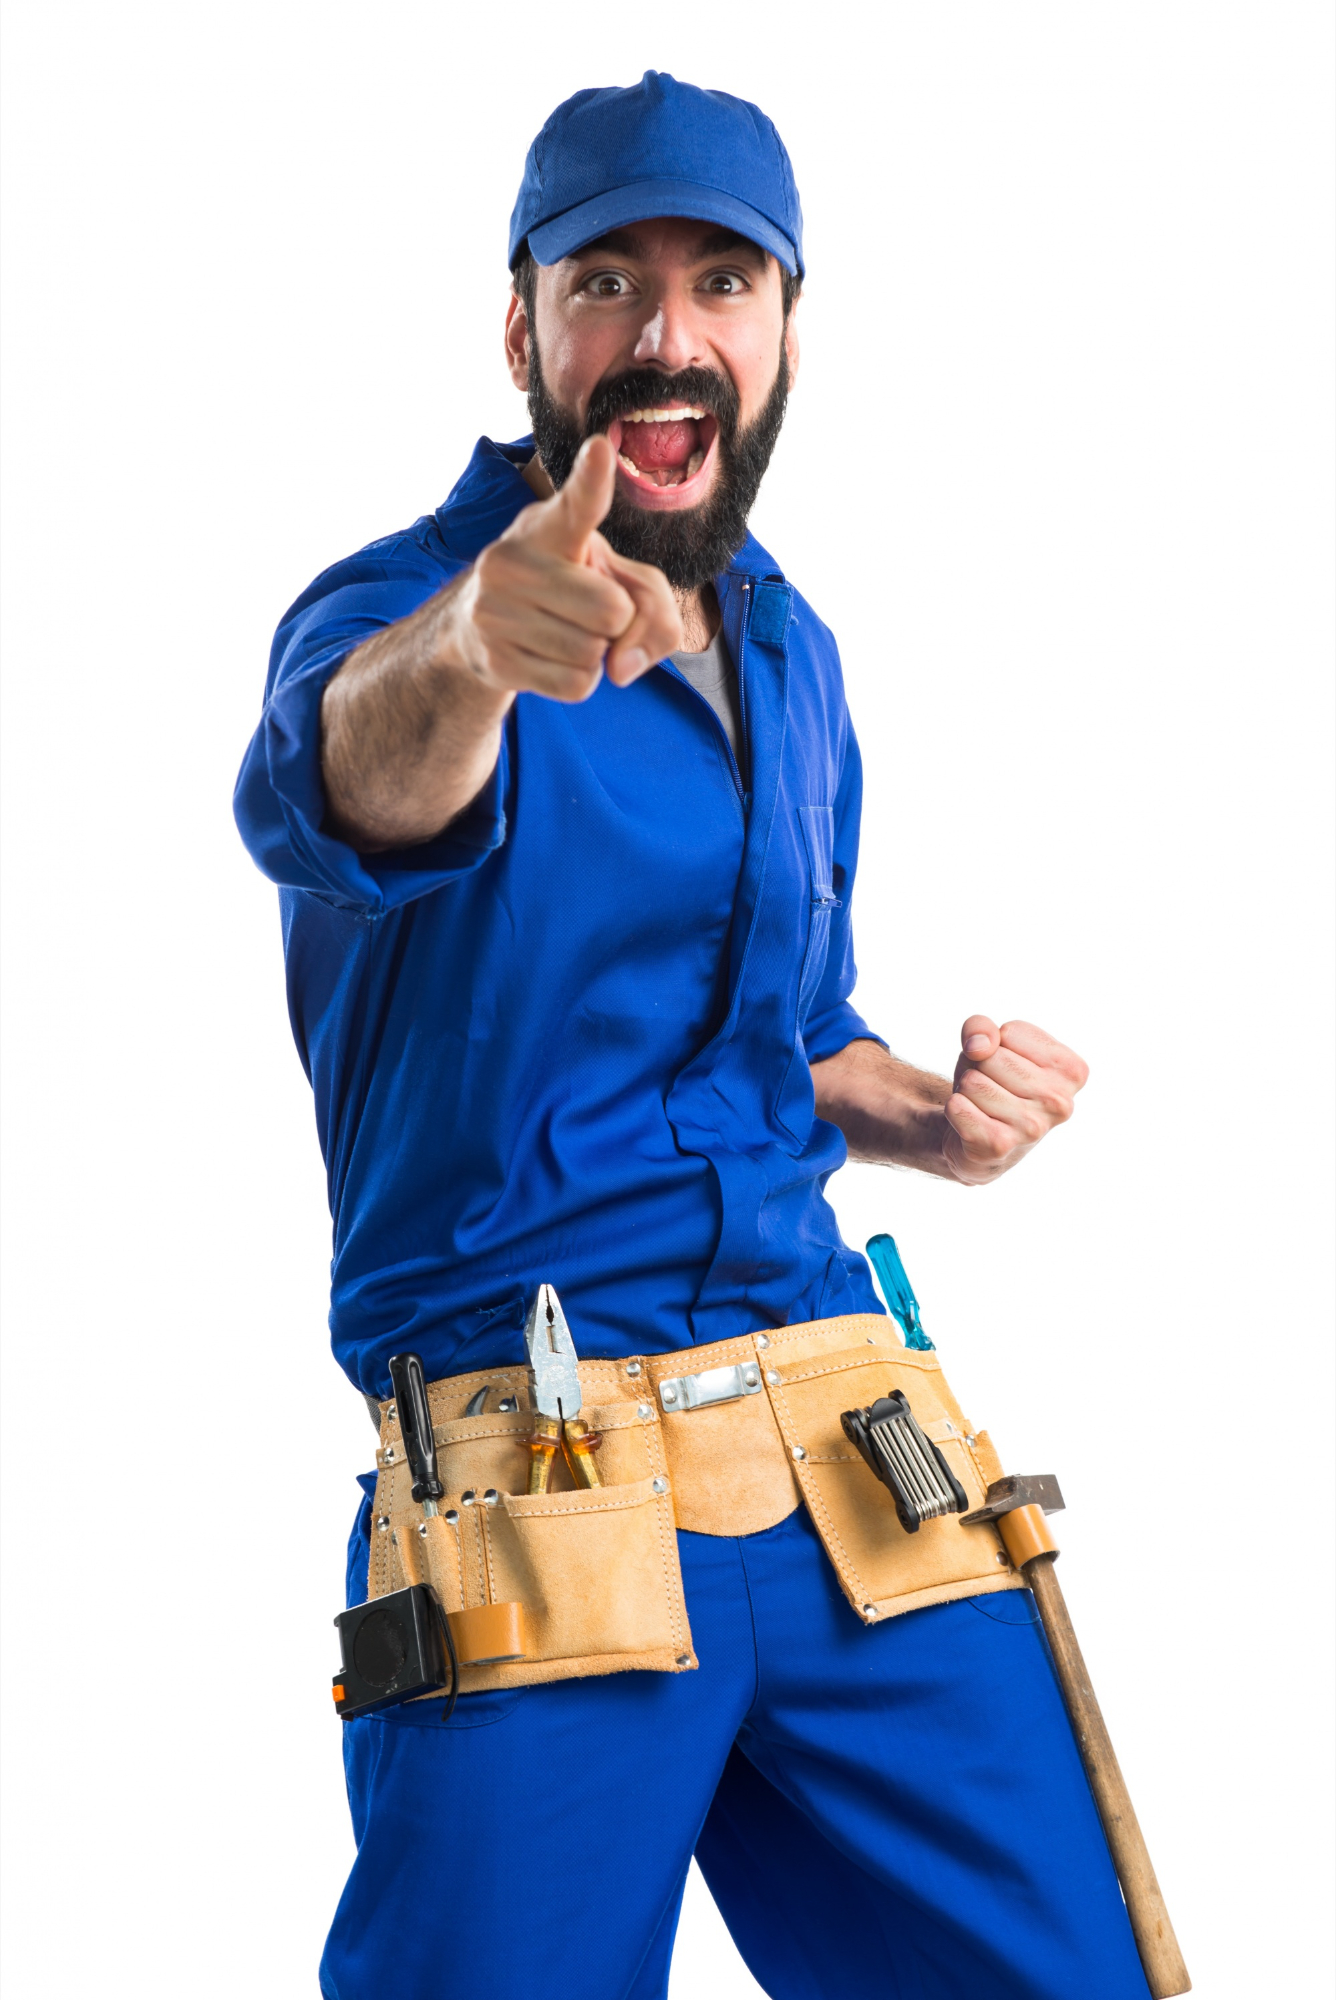 A supportive and happy plumber | Source: Freepik